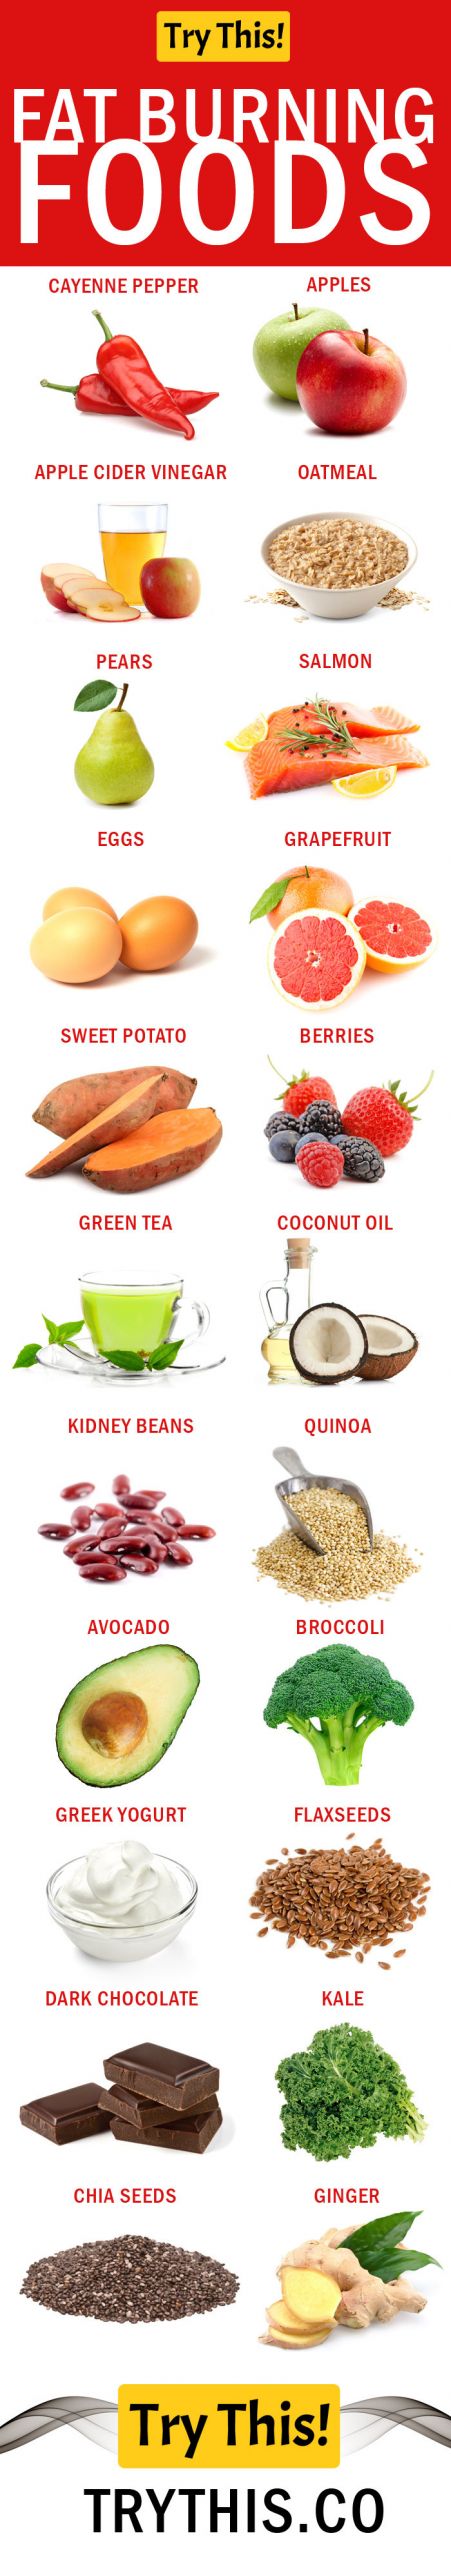 Good Fat Burning Foods
 Fat Burning Foods – Best Foods To Eat For Weight Loss